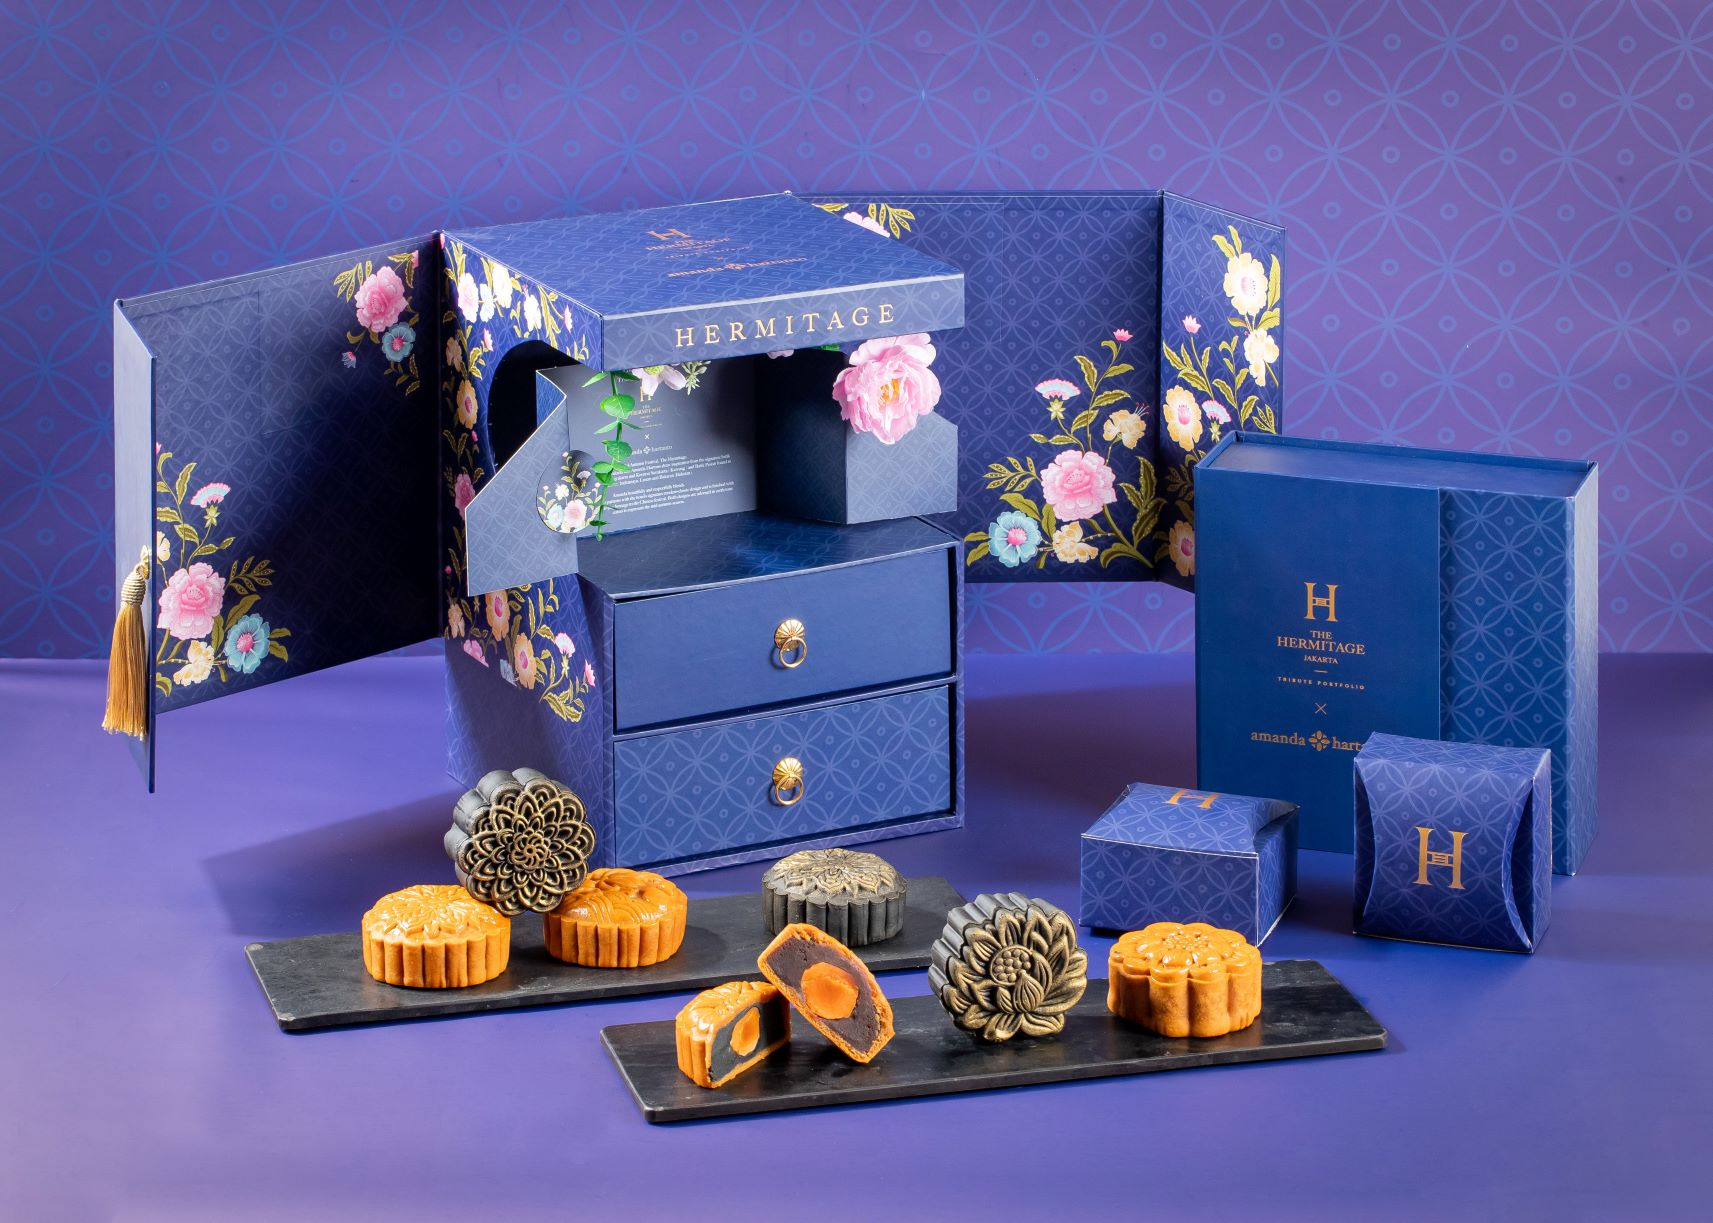 The Hermitage Jakarta Limited Edition Mooncake Hampers by Amanda Hartanto